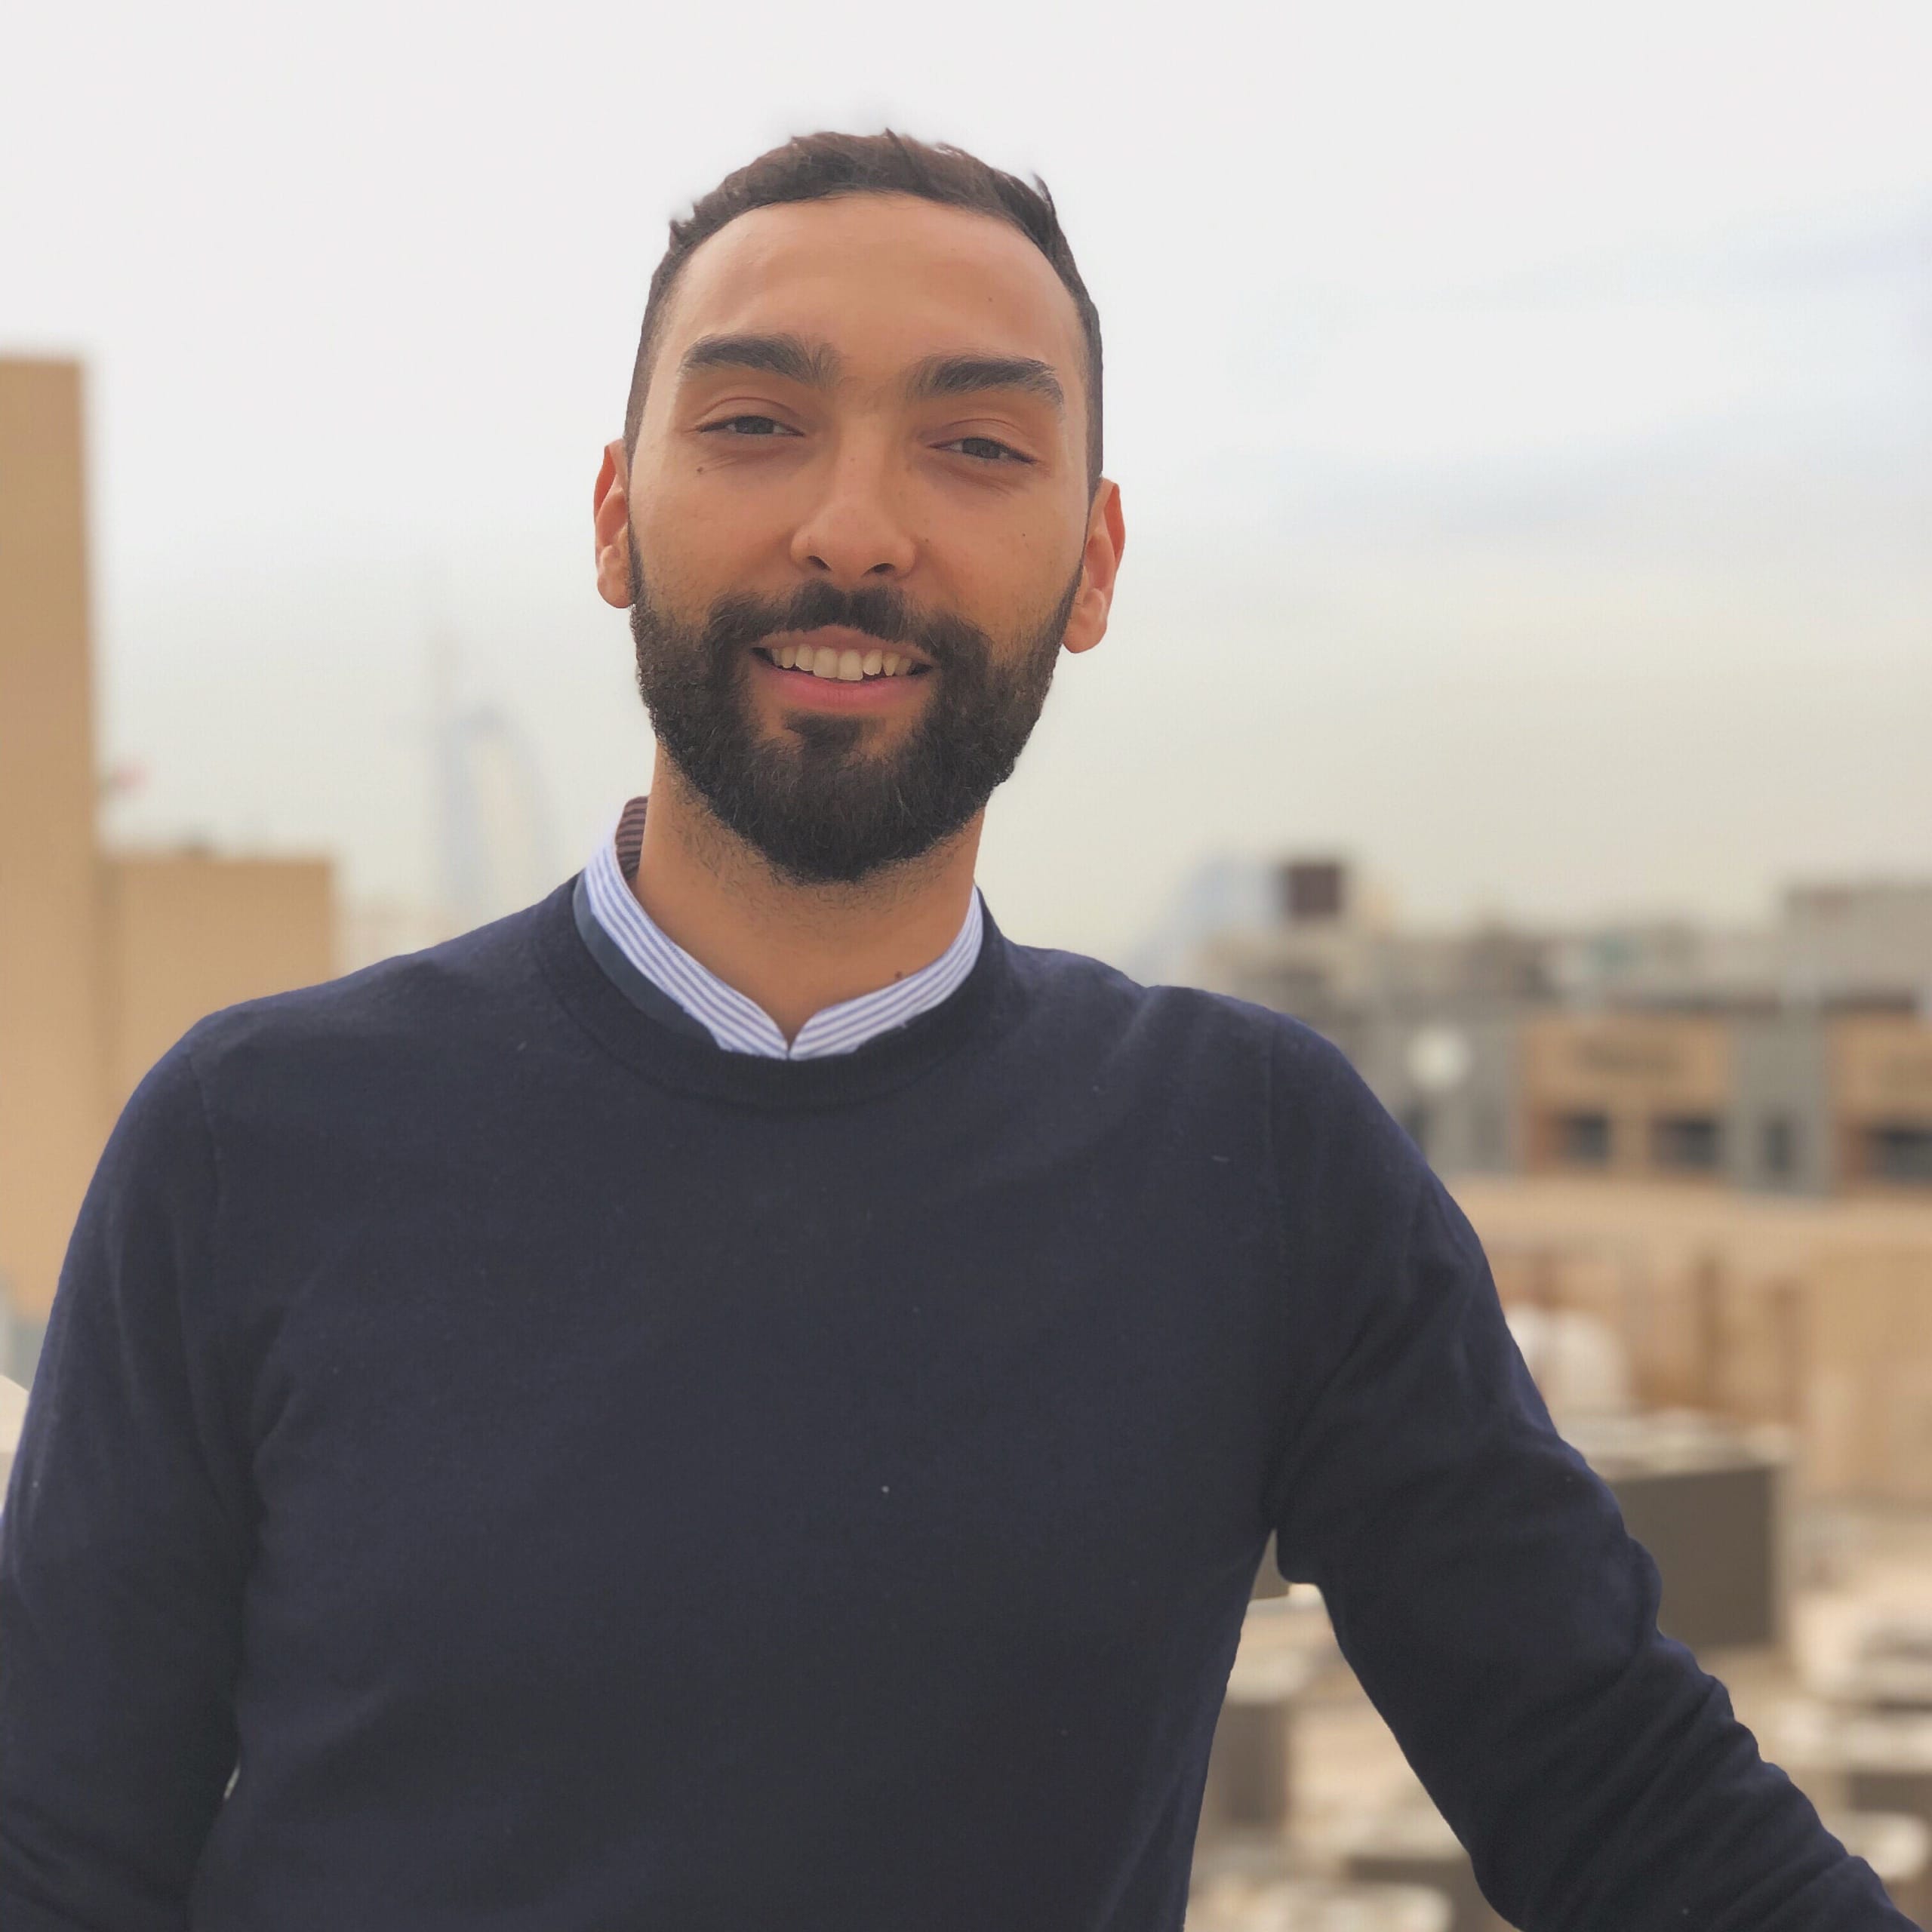 Meet Hakim from the Powell Software Team!